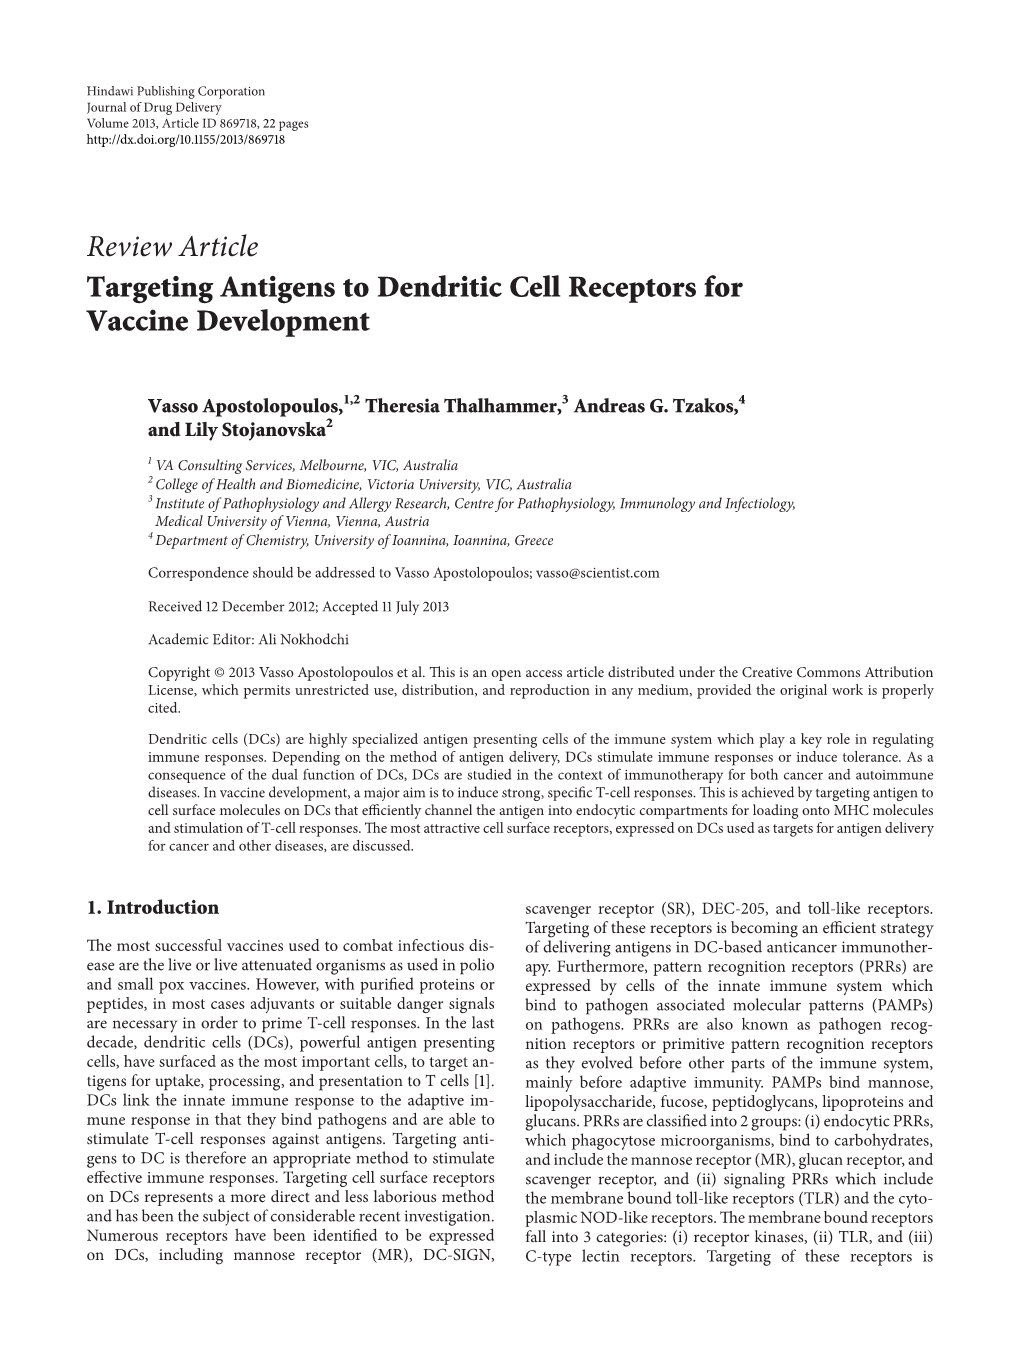 Review Article Targeting Antigens to Dendritic Cell Receptors for Vaccine Development